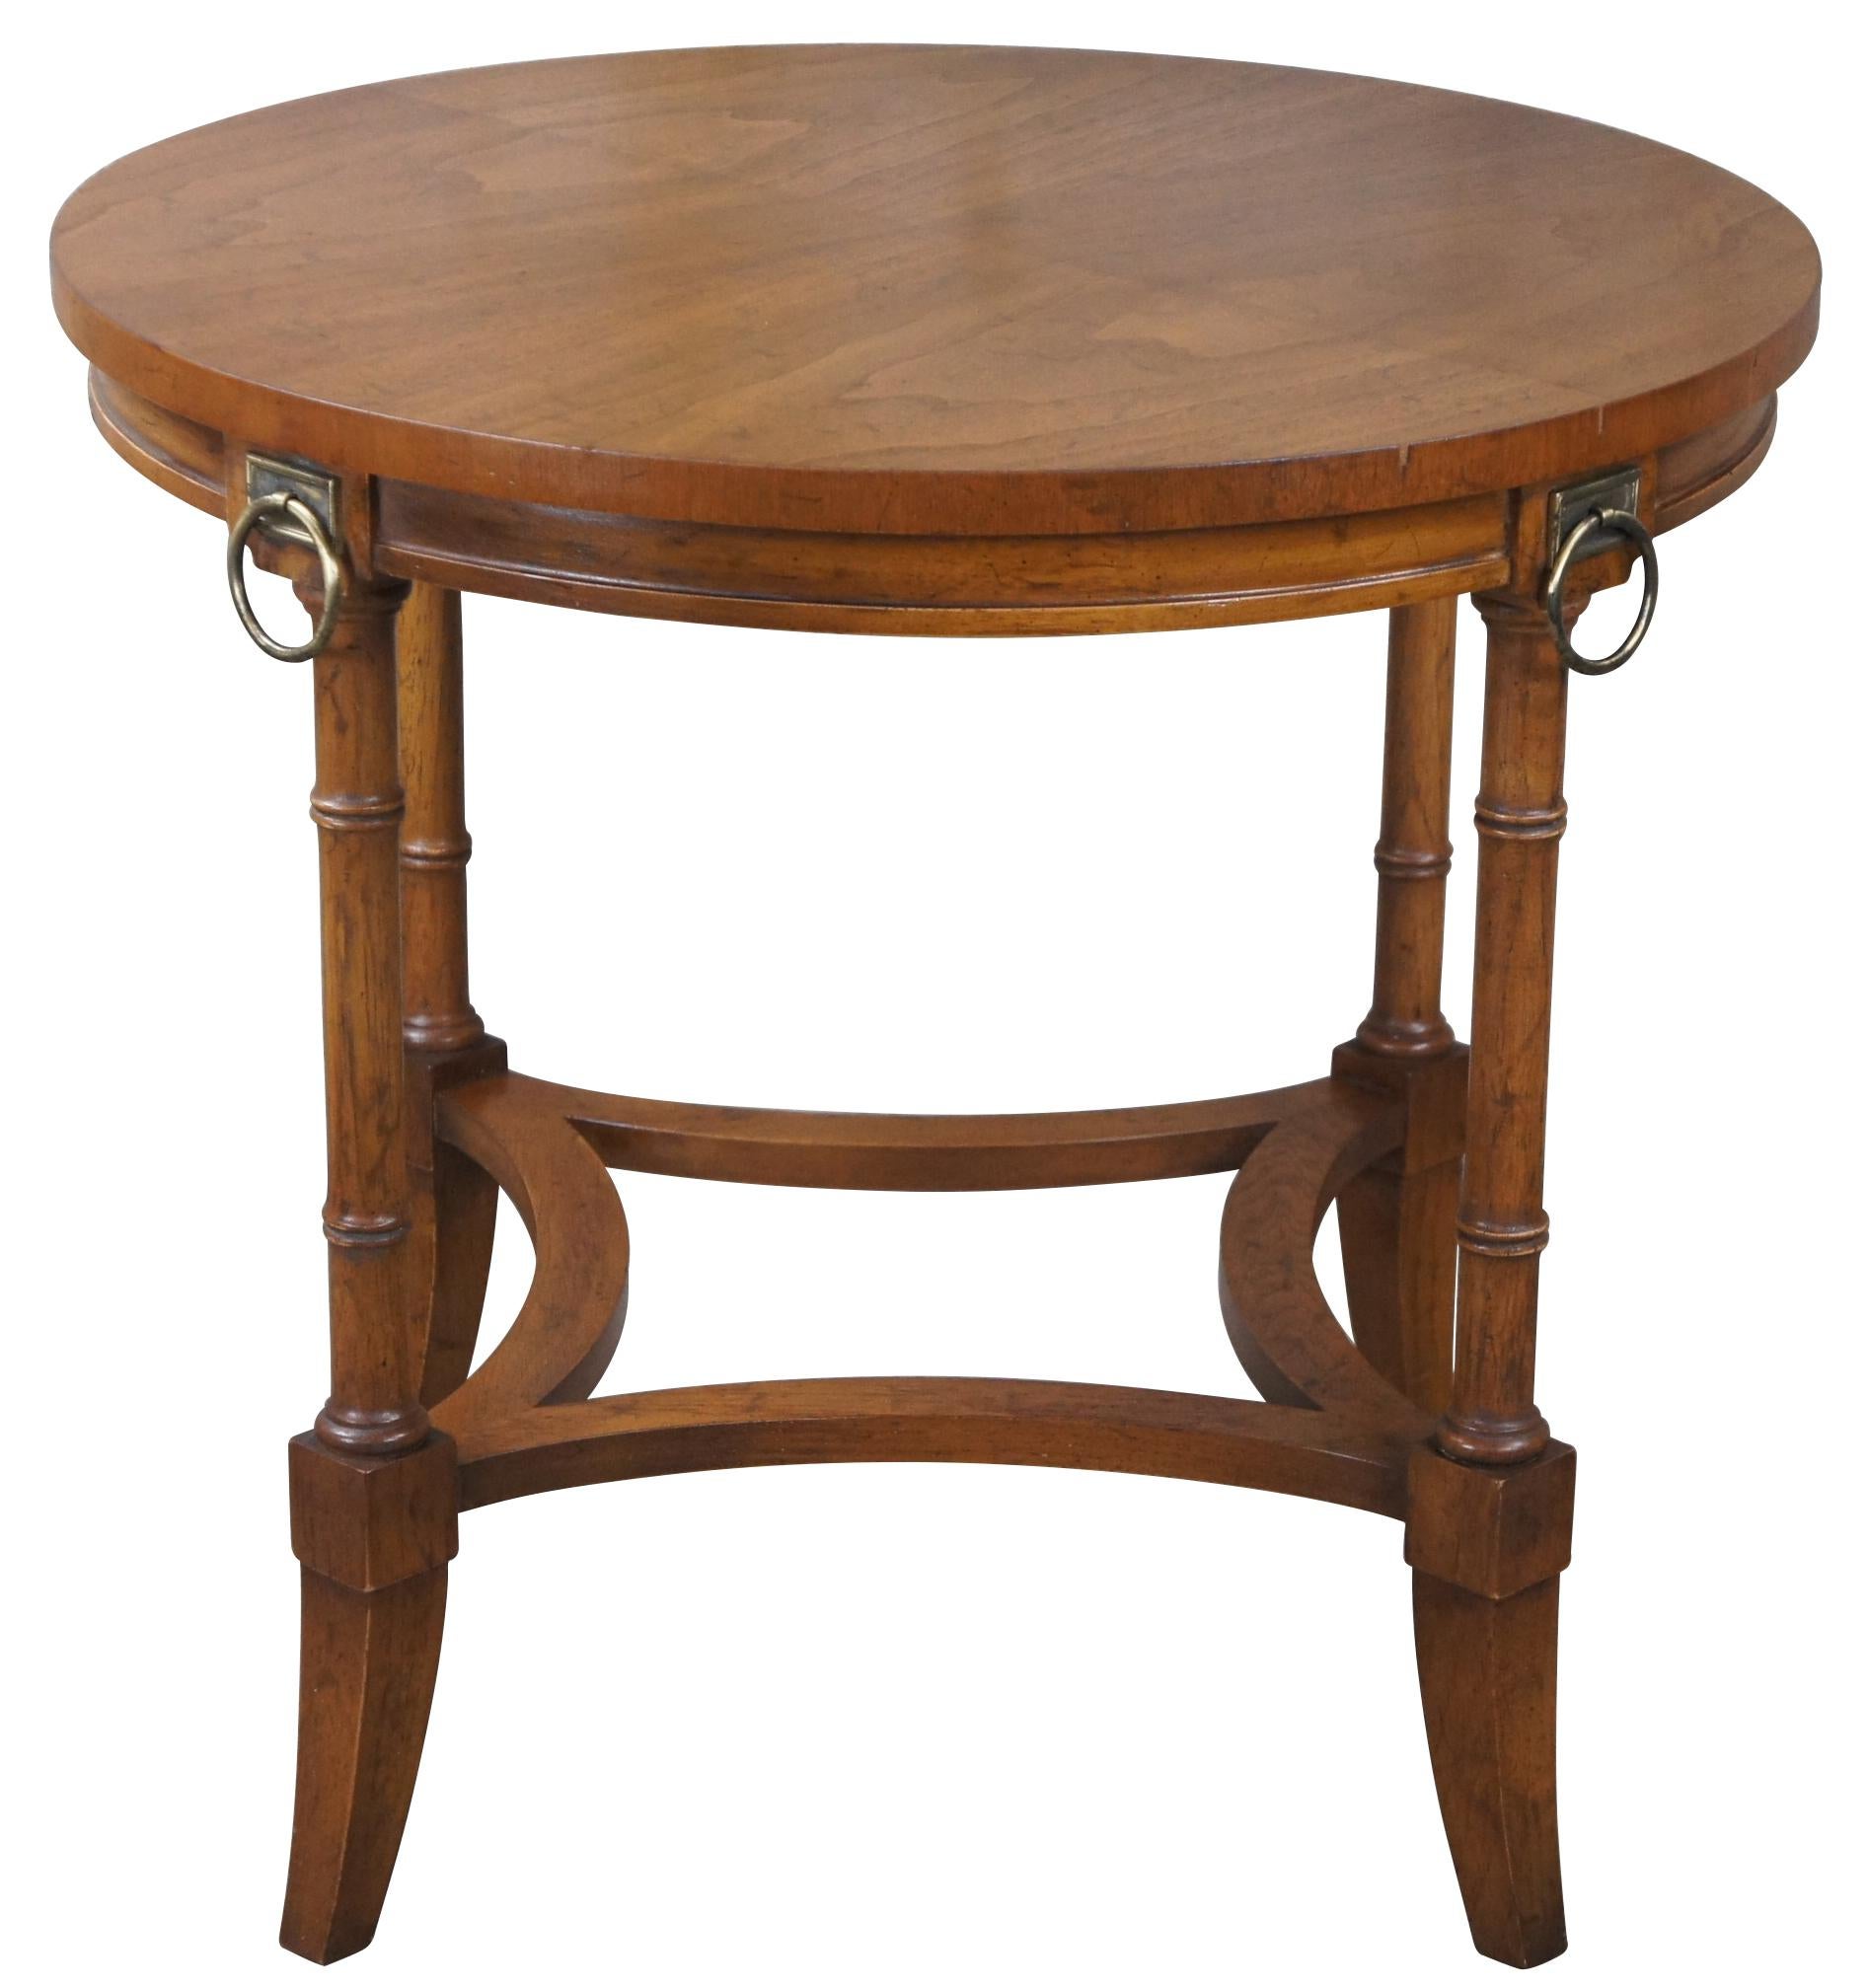 Mid century Drexel Heritage grand tour accent table. Drawing inspiration from French Empire and British Campaign styling. A round form made from walnut with a matchbook top, brass ring knocker accents and faux bamboo columns. Circa 1965, 23-546-41,